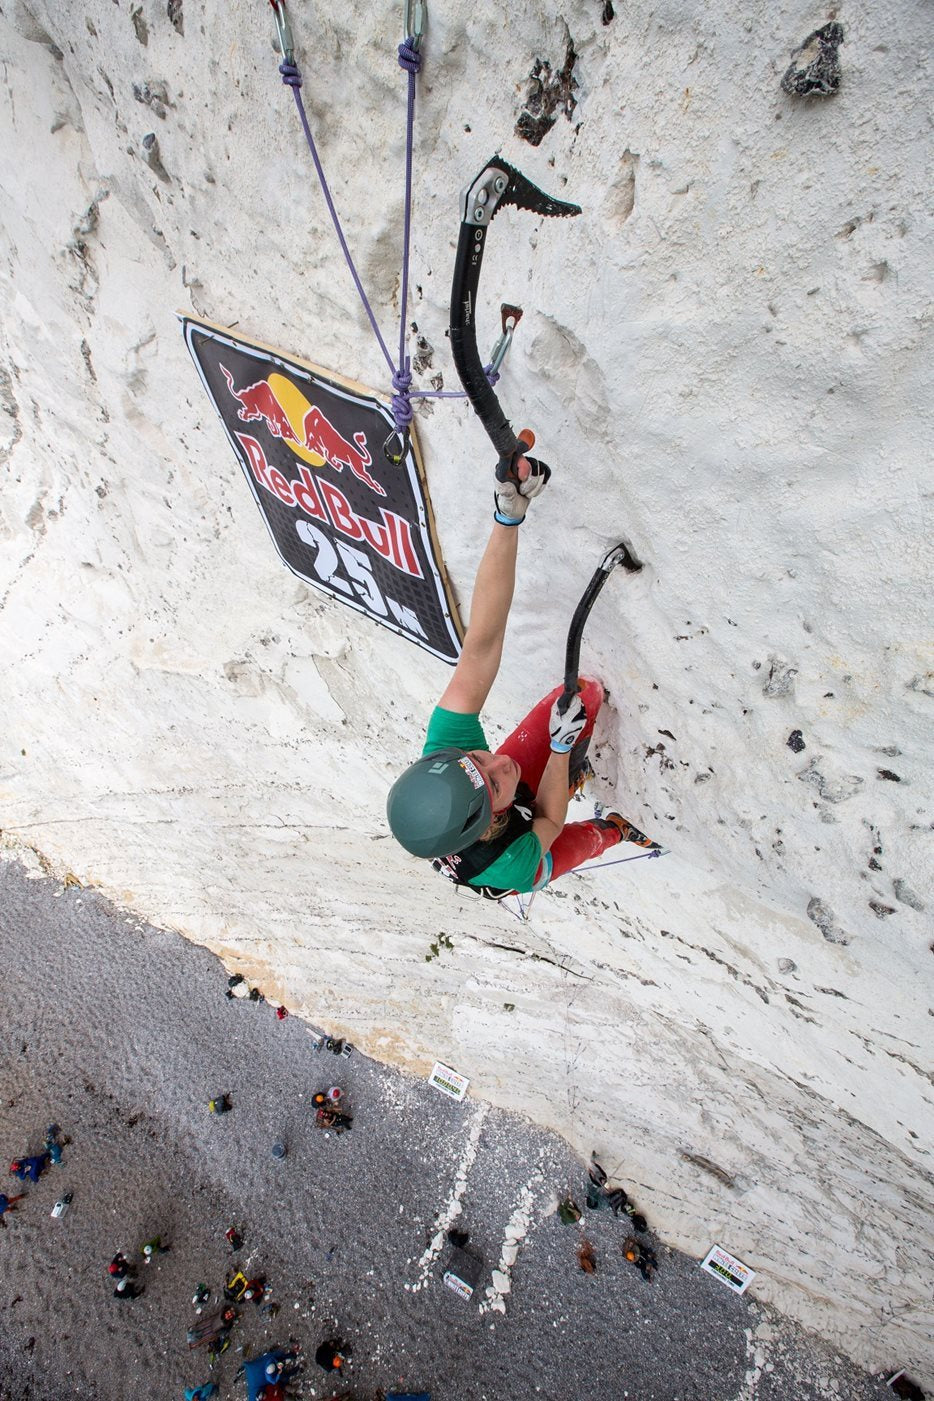 Anna competing at Red Bull White Cliffs competition on the Isle of White 